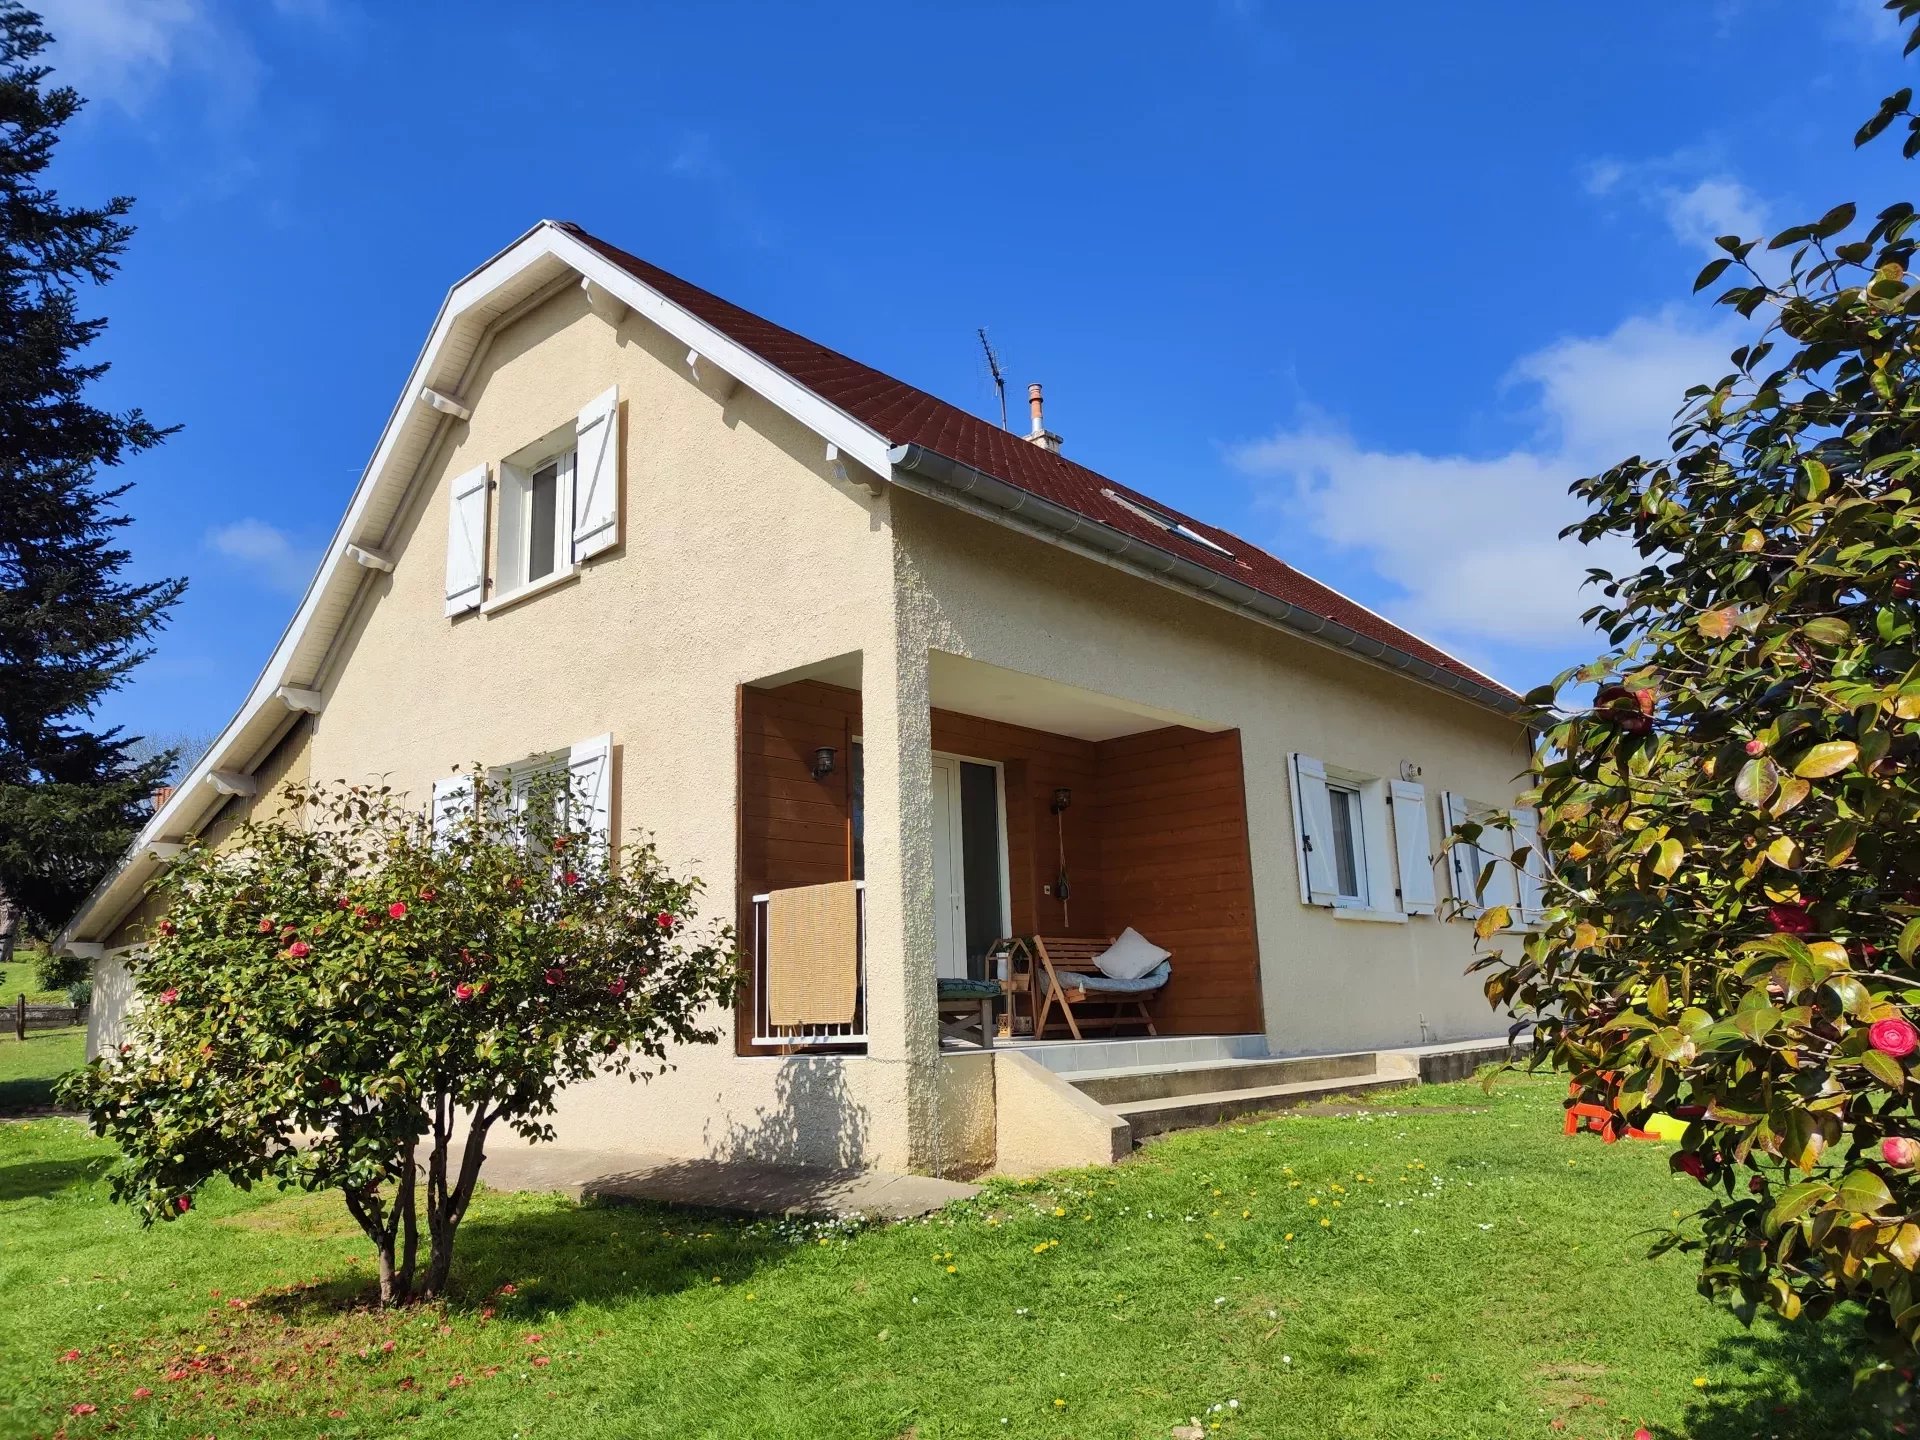 Well-maintained house only a short walk from the town centre of Salies-de-Béarn